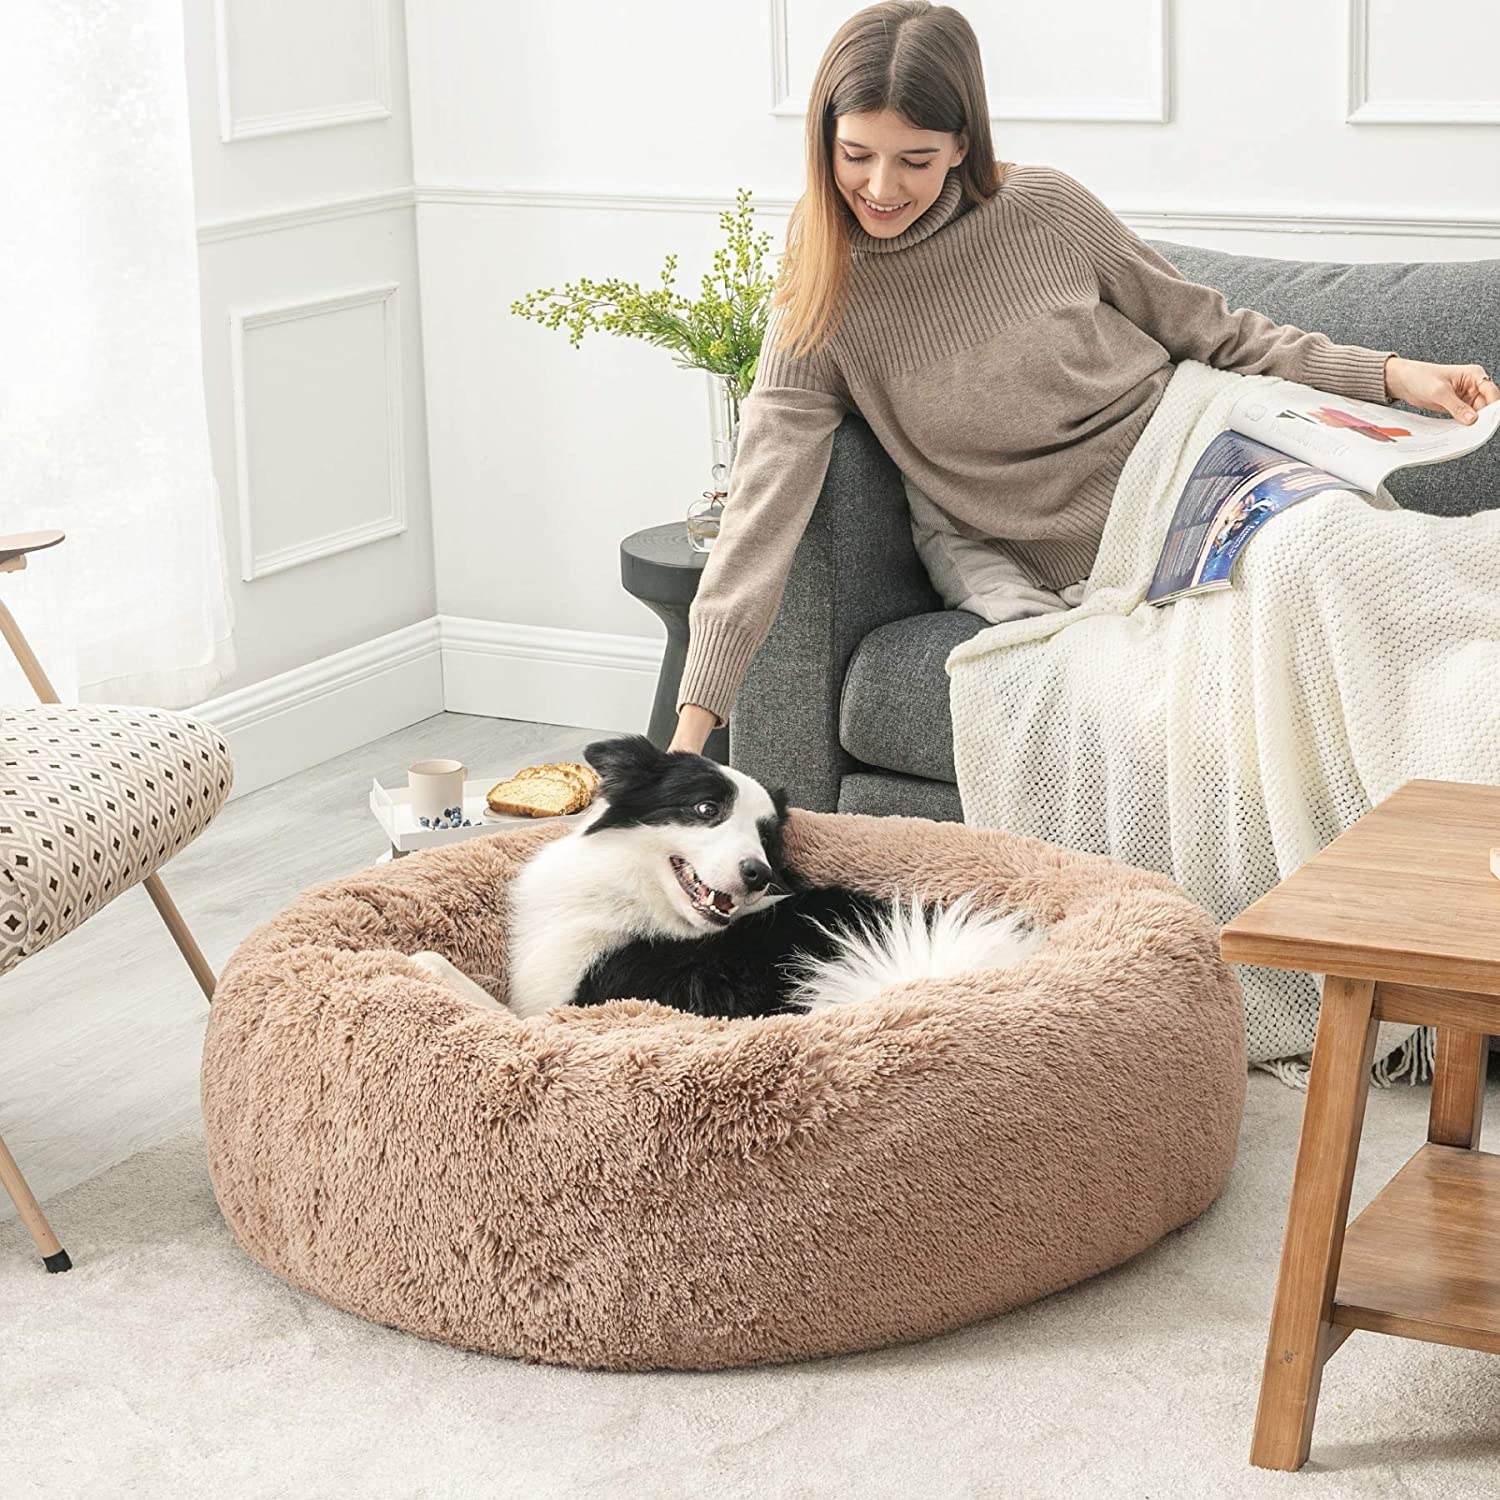 A person petting a border collie that is lying on the bed